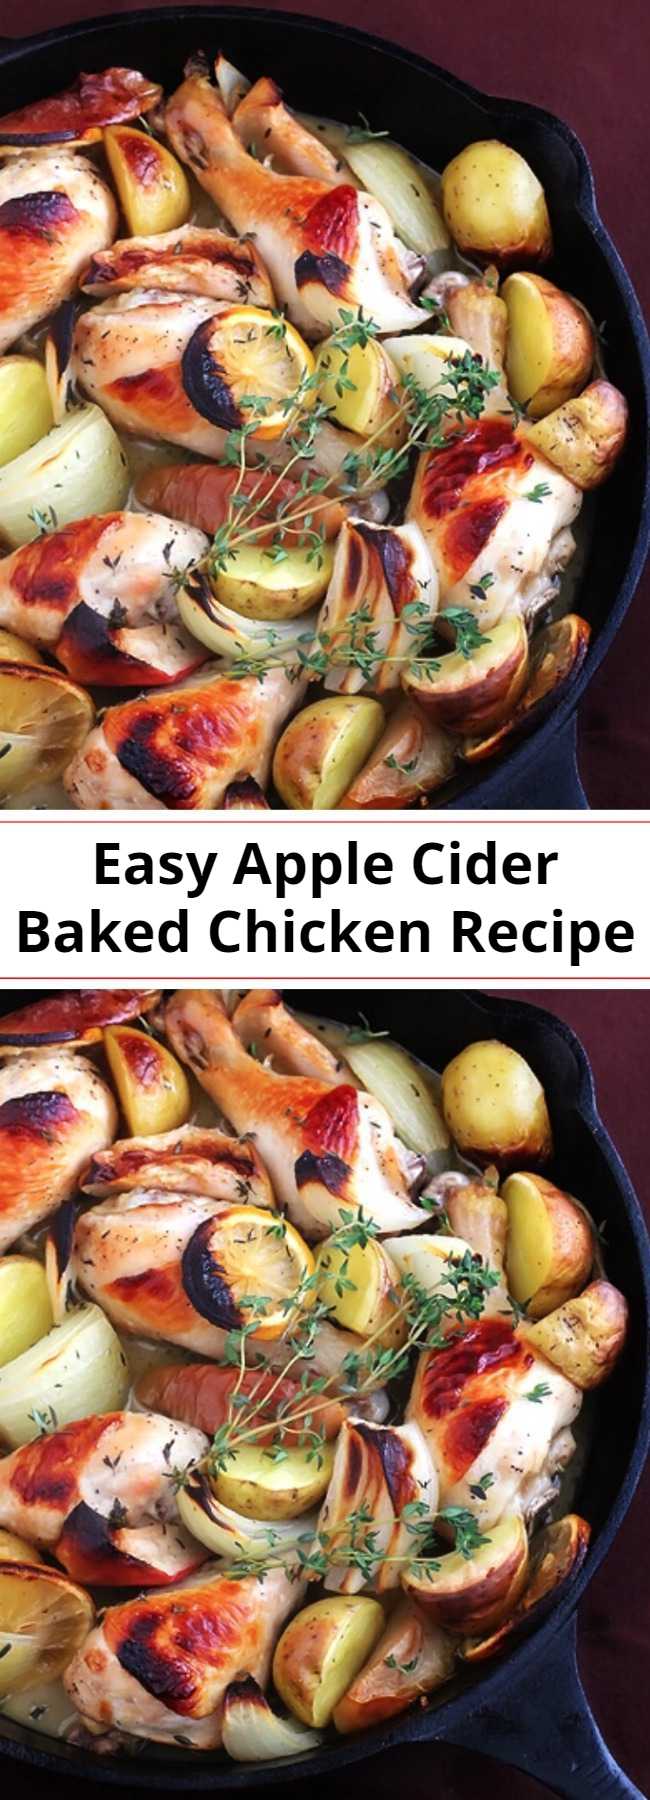 Easy Apple Cider Baked Chicken Recipe - Love apples and chicken? Then you are sure to love this Apple Cider Baked Chicken recipe! Blend your easy dinner favorites with the flavor of the season.